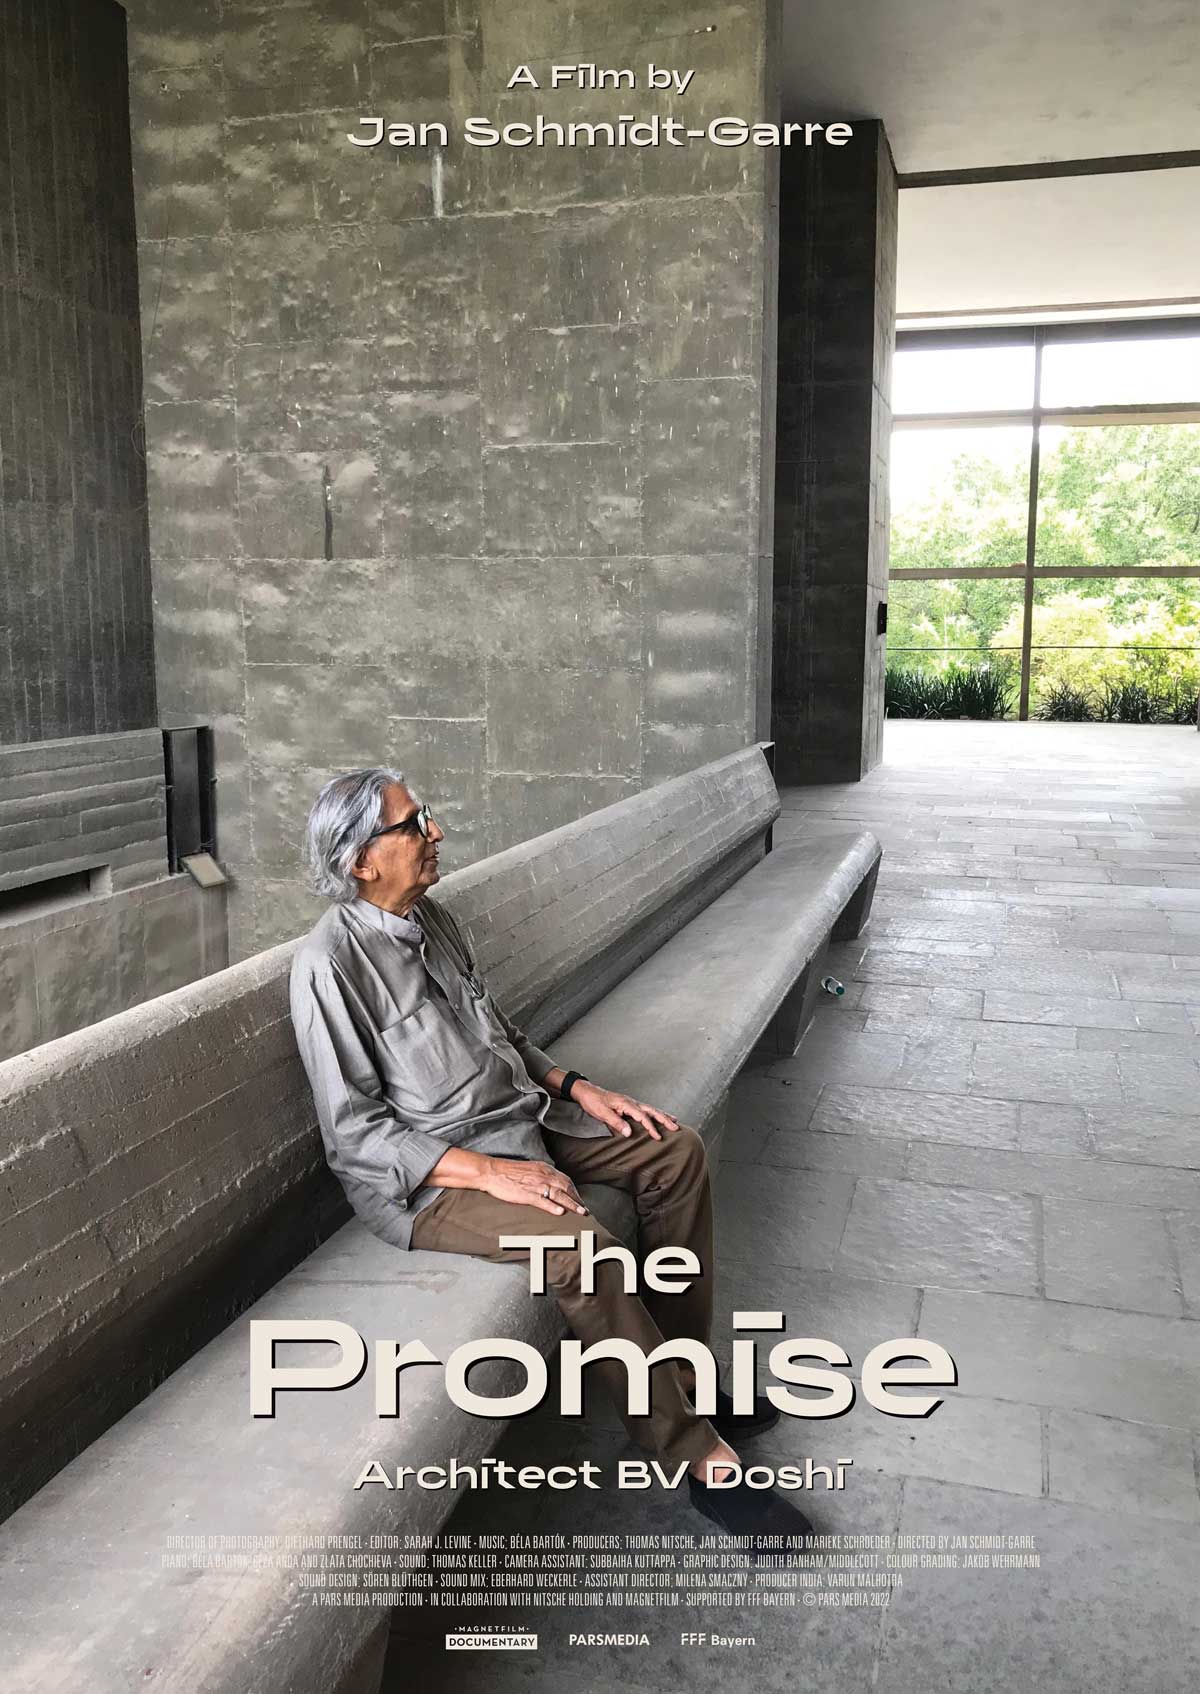 Promotional poster for the Promise.